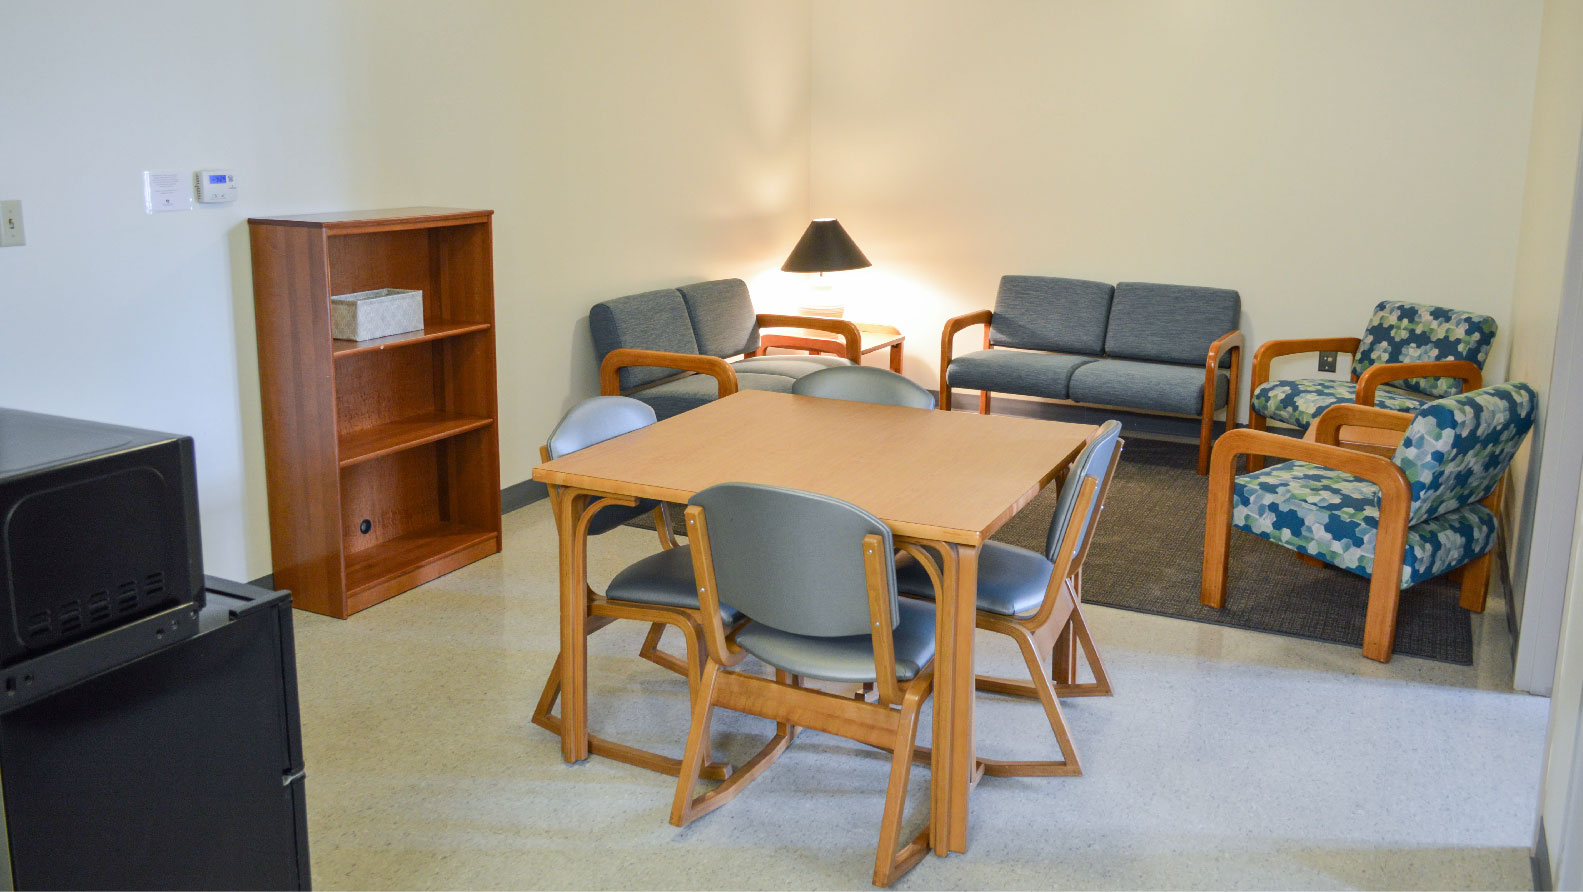 Scholars En-suite living area with 2 loveseats 2 chairs a dining table with 4 chairs and bookshelf